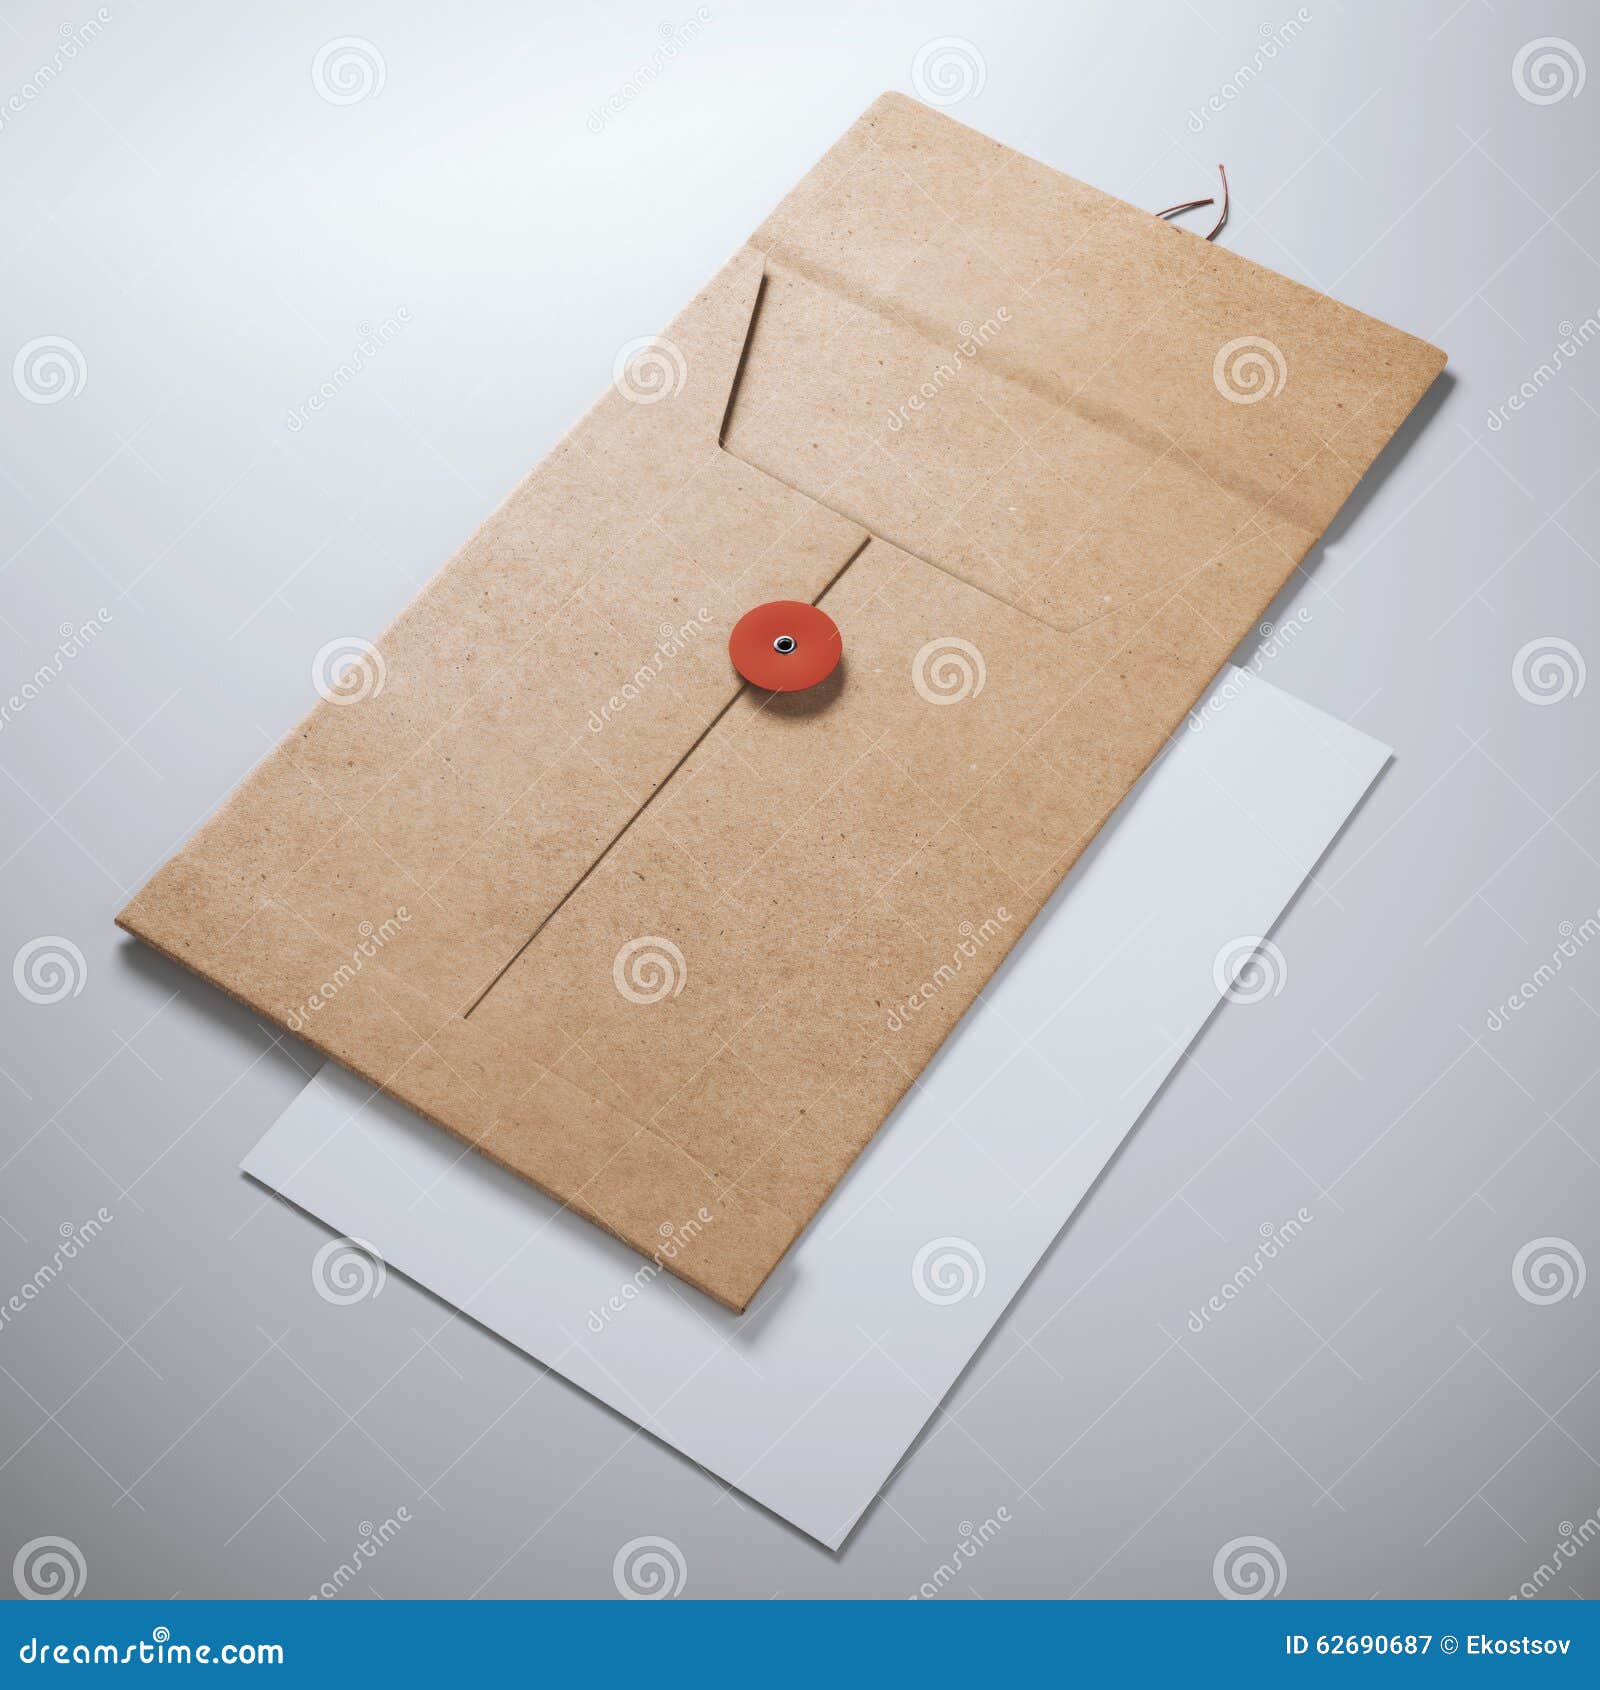 Empty Opened Folder And Sheet Of Paper. Stock Image - Image of single ...